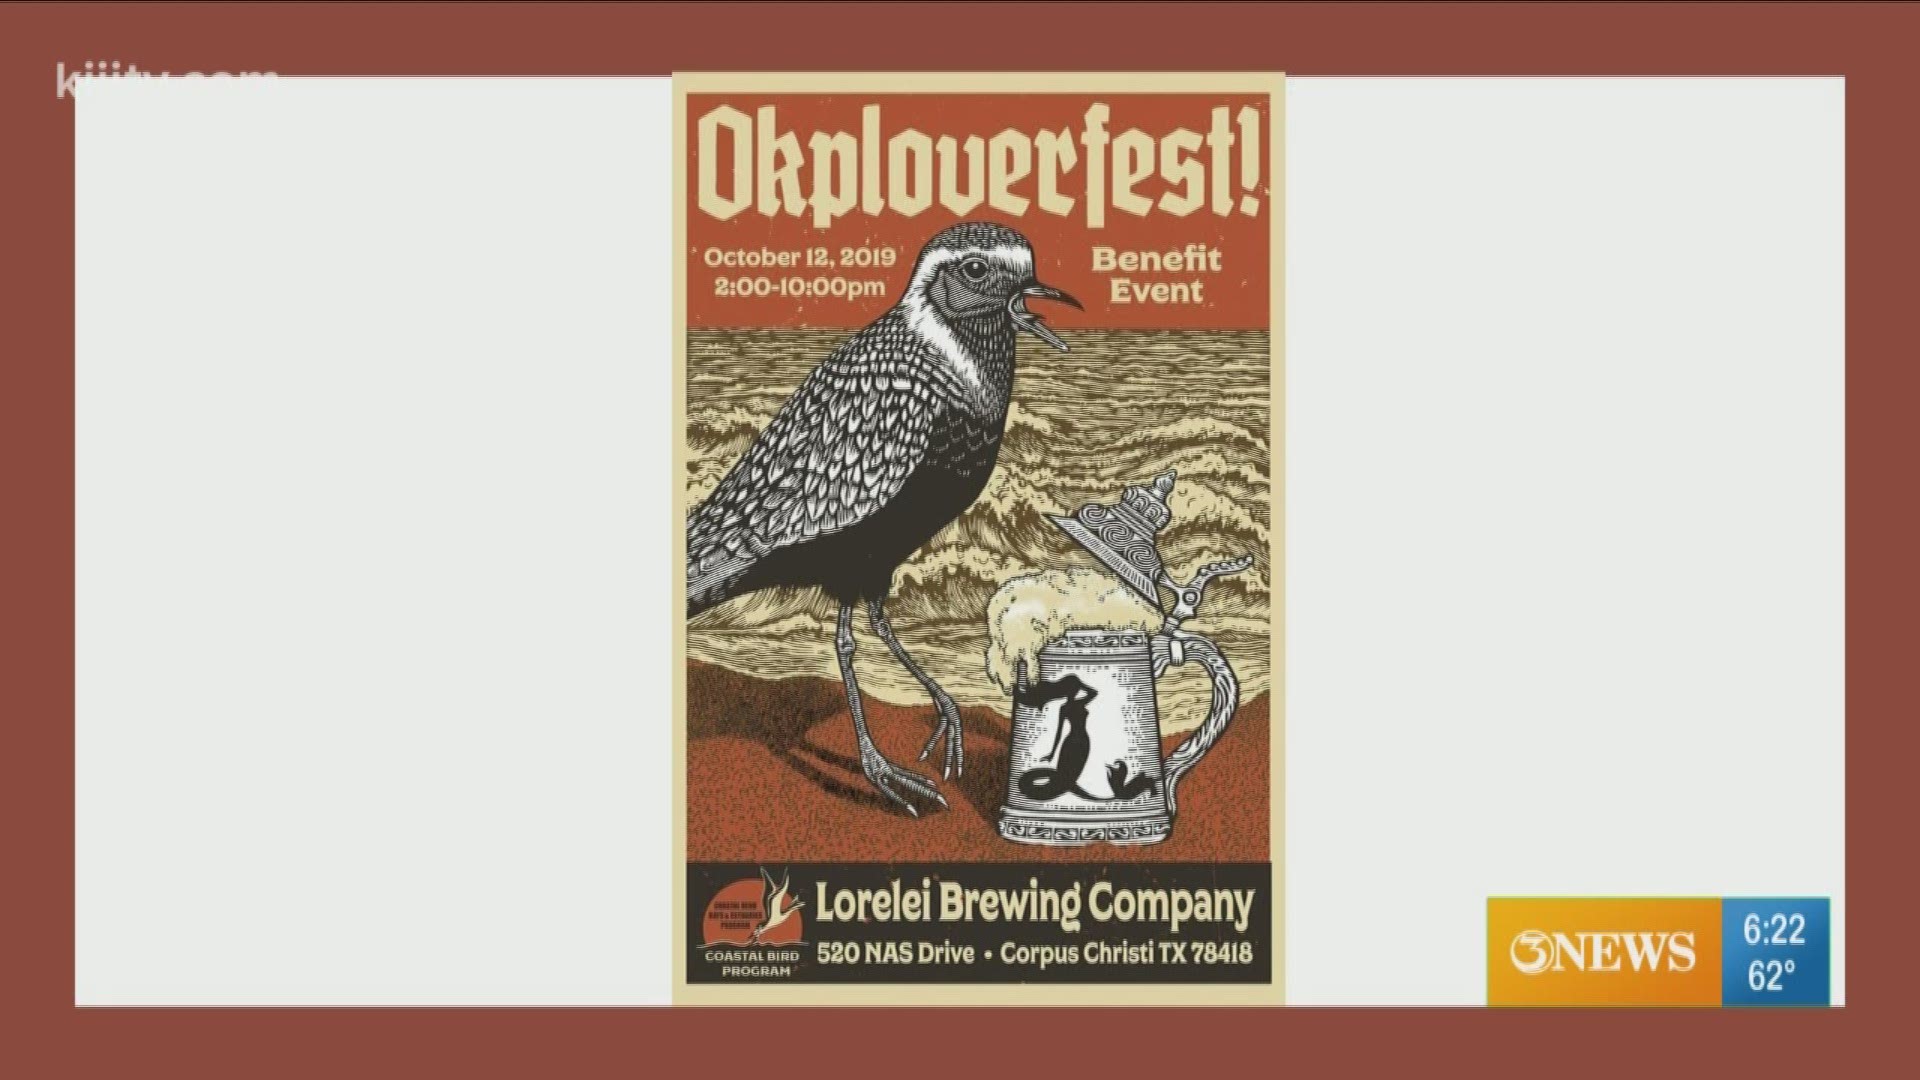 To bring awareness of a decline in birds, Okploverfest happing this weekend